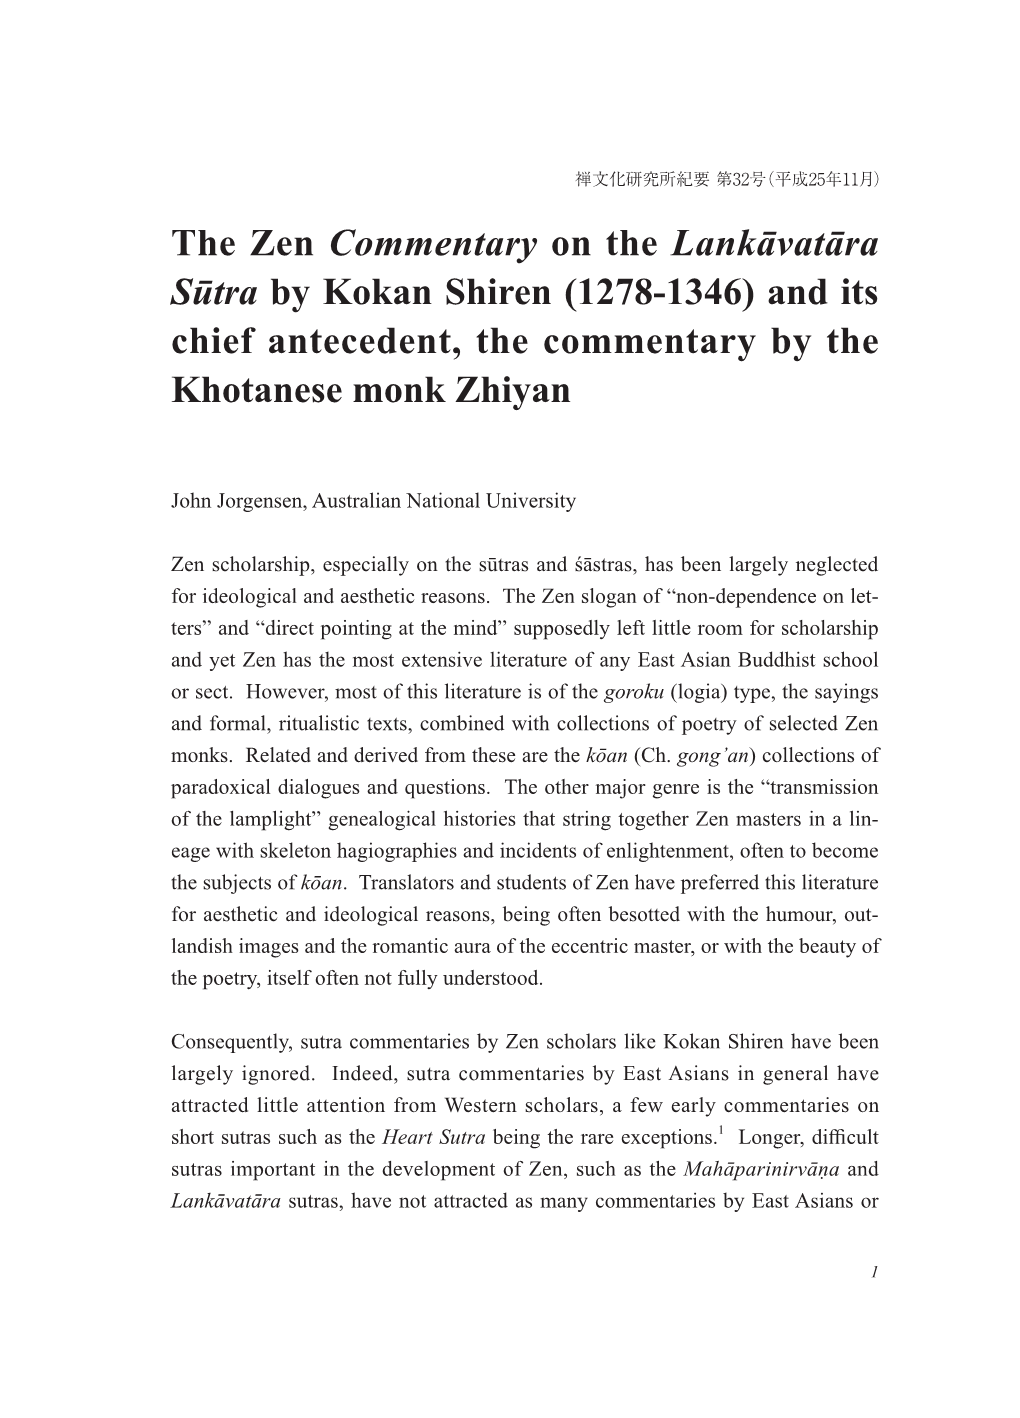 The Zen Commentary on the Lankāvatāra Sūtra by Kokan Shiren (1278-1346) and Its Chief Antecedent, the Commentary by the Khotanese Monk Zhiyan